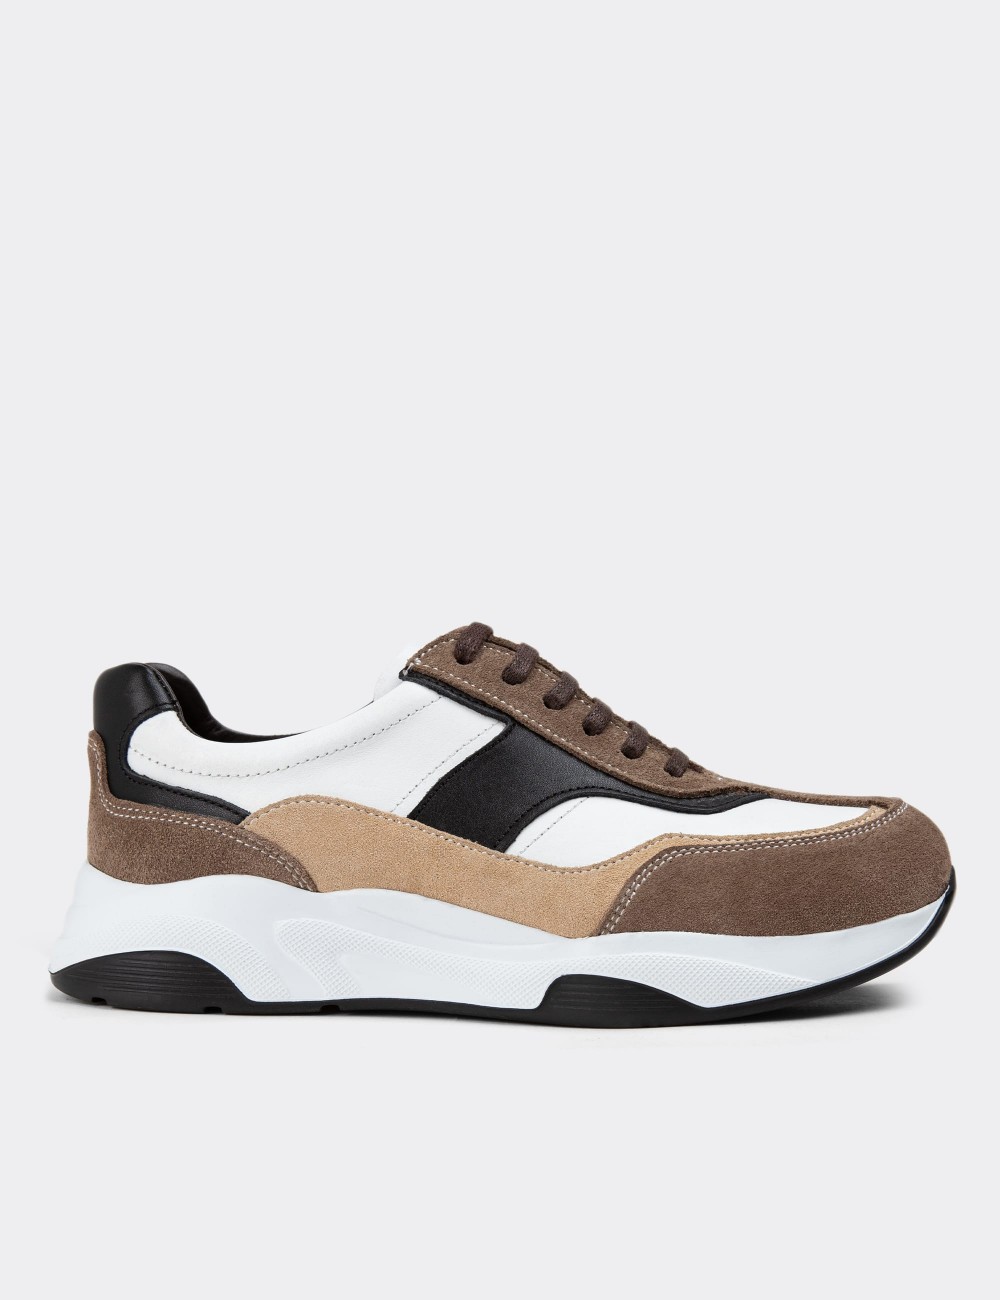 Sandstone Suede Leather Sneakers - 01890ZVZNE01